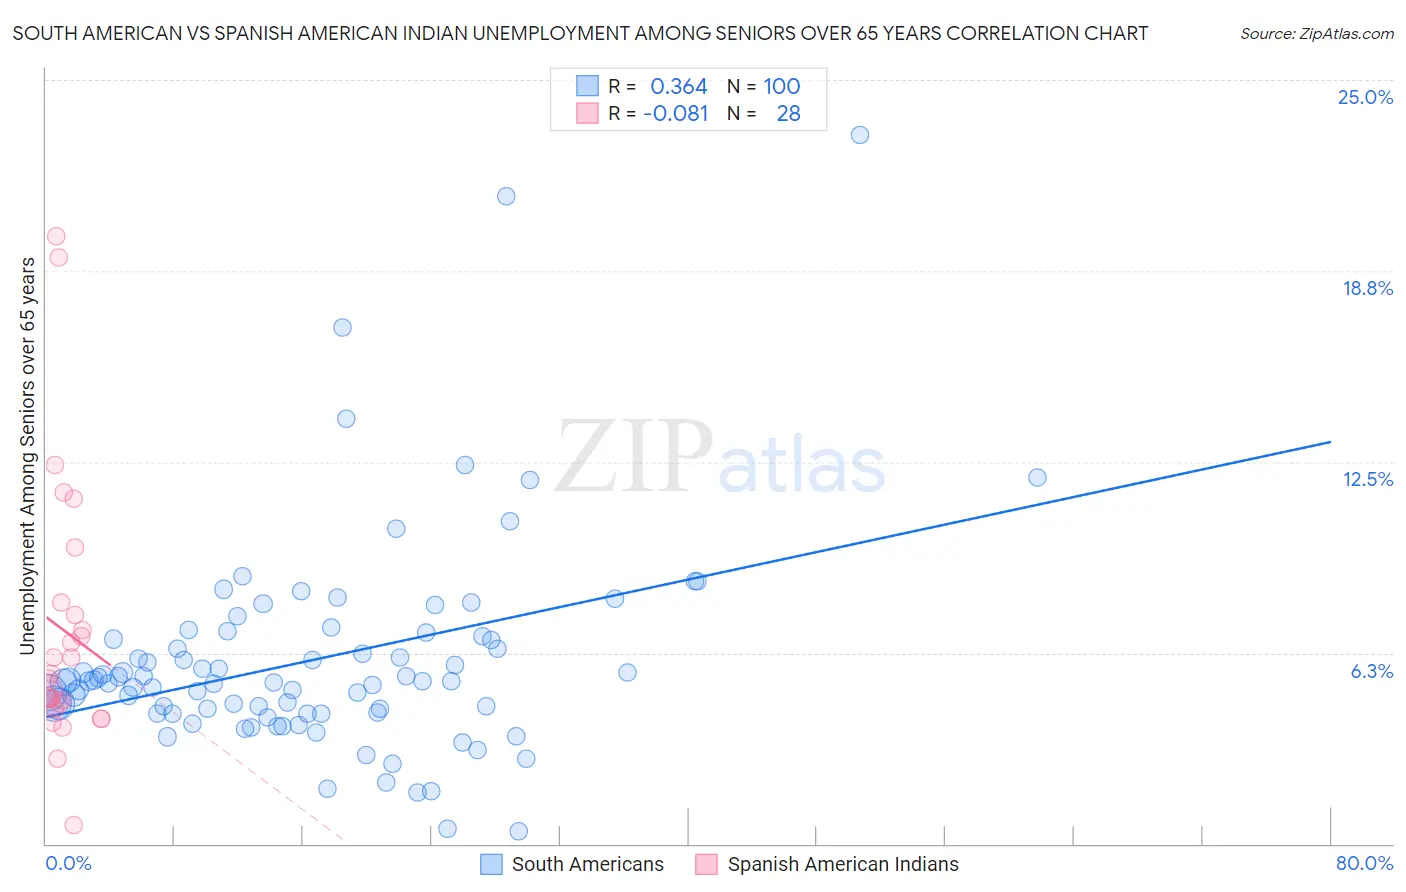 South American vs Spanish American Indian Unemployment Among Seniors over 65 years